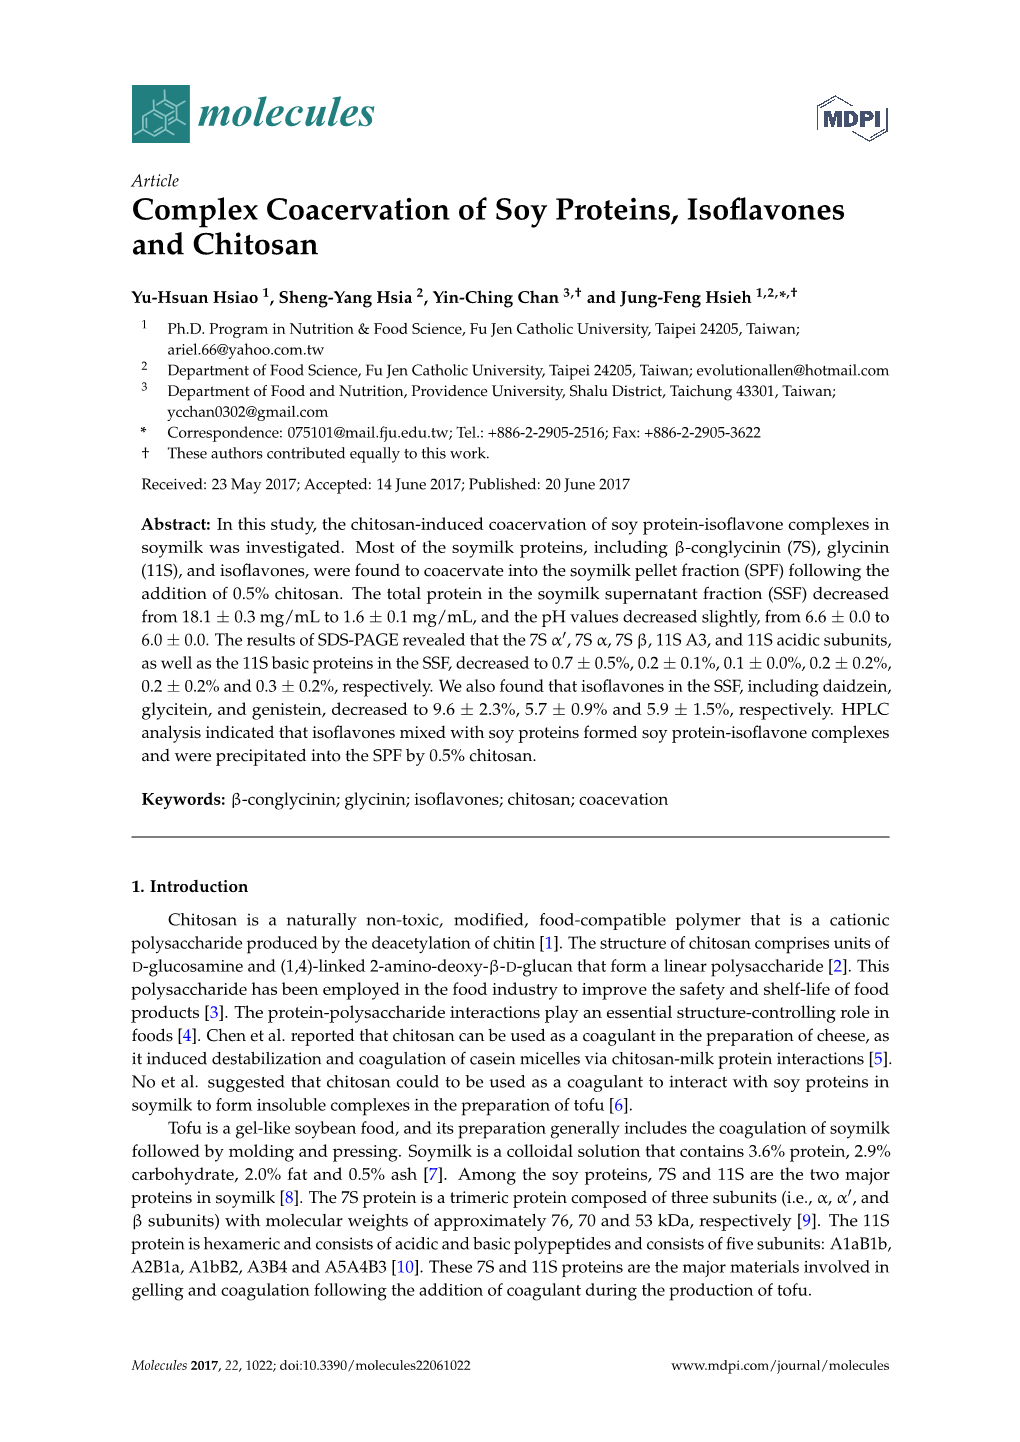 Complex Coacervation of Soy Proteins, Isoflavones and Chitosan